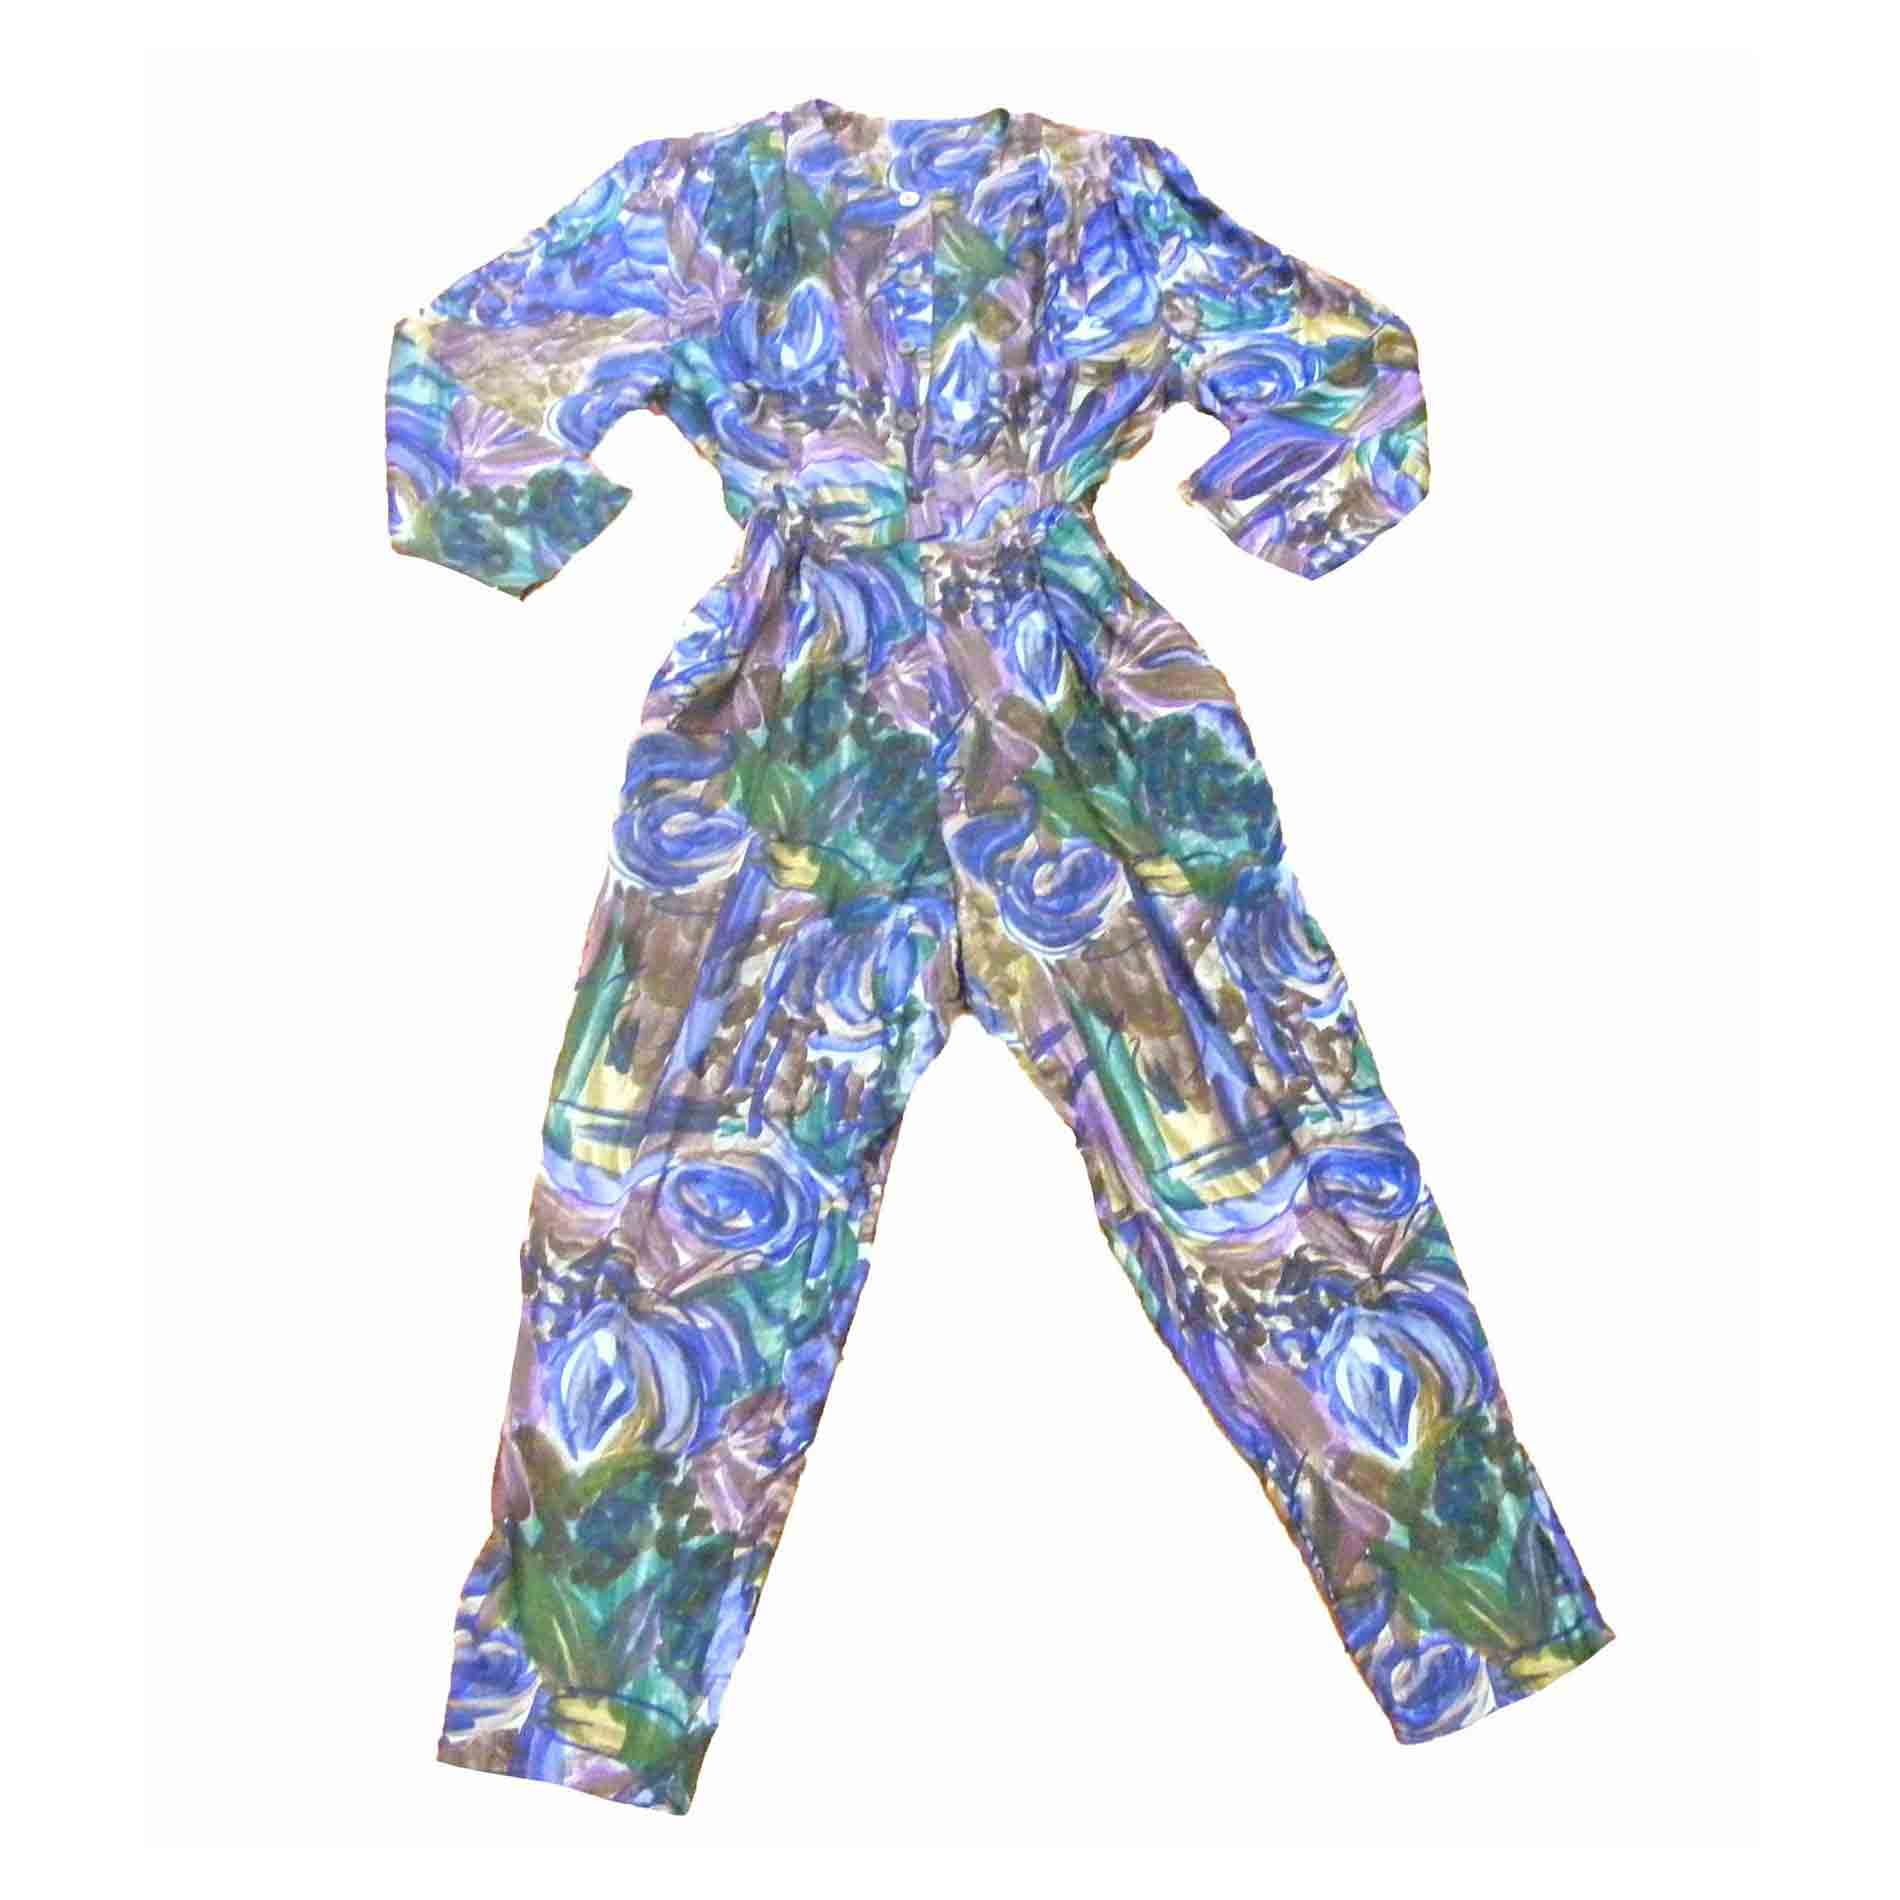 Vintage Play suits & Jump suits for Women - Blue 17 Vintage Clothing